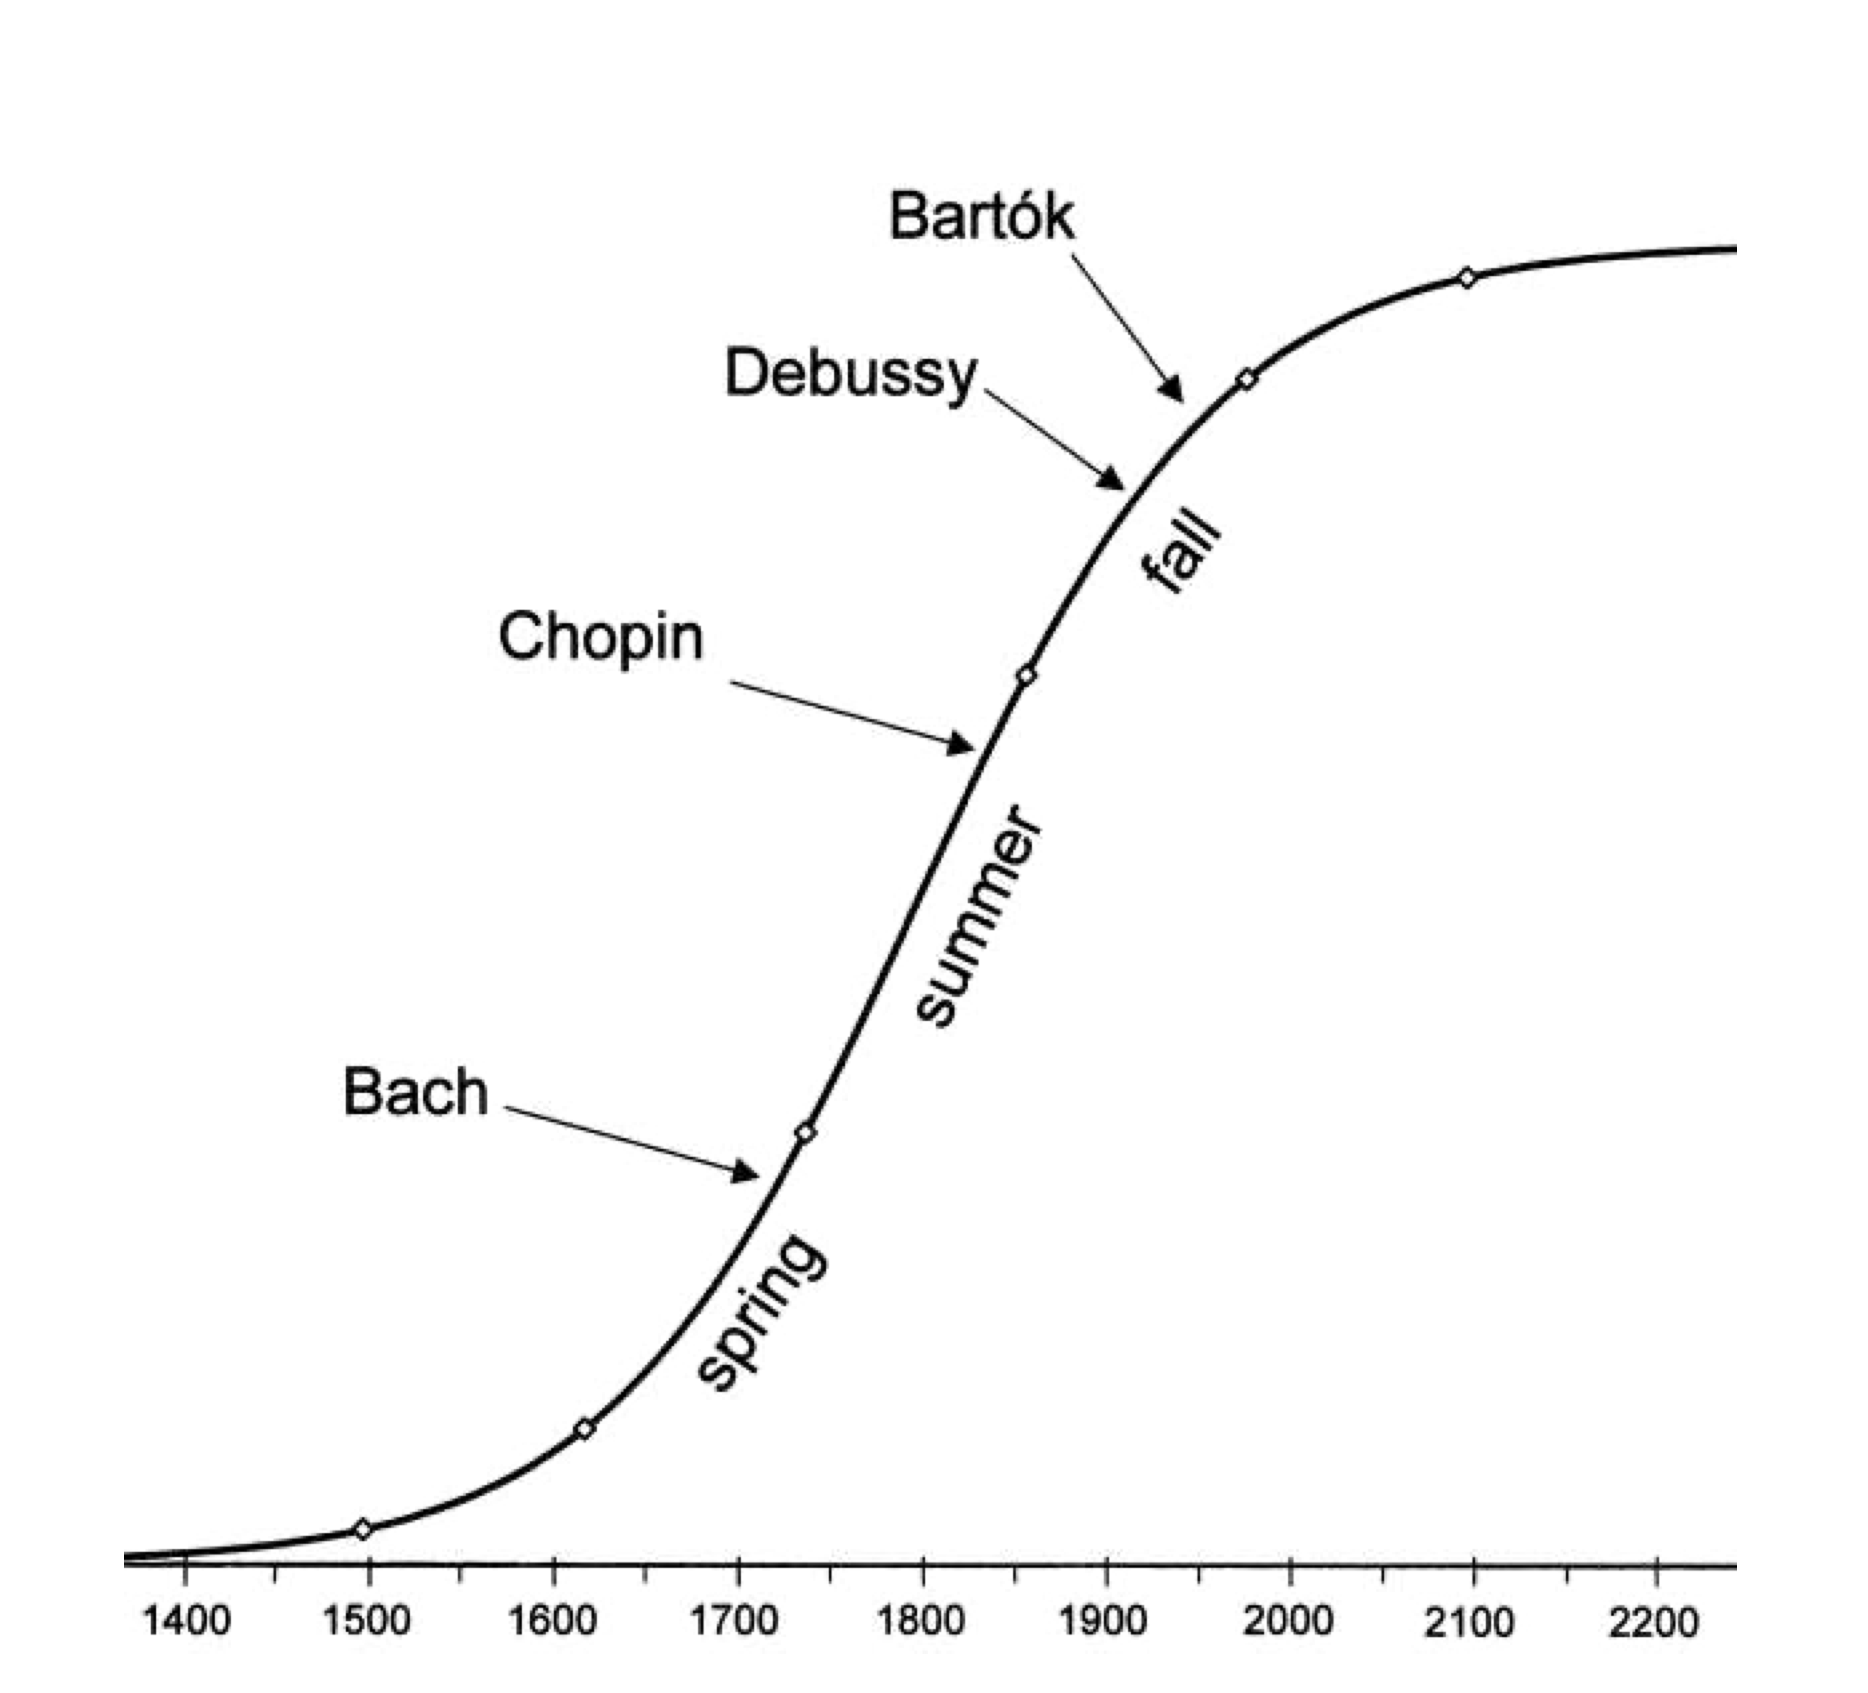 The evolution of classical music. The vertical axis could be something like 'importance', 'public appreciation', or 'public preoccupation with music' (always cumulative). Adopted from @Modis2013-to with the permission from the author.